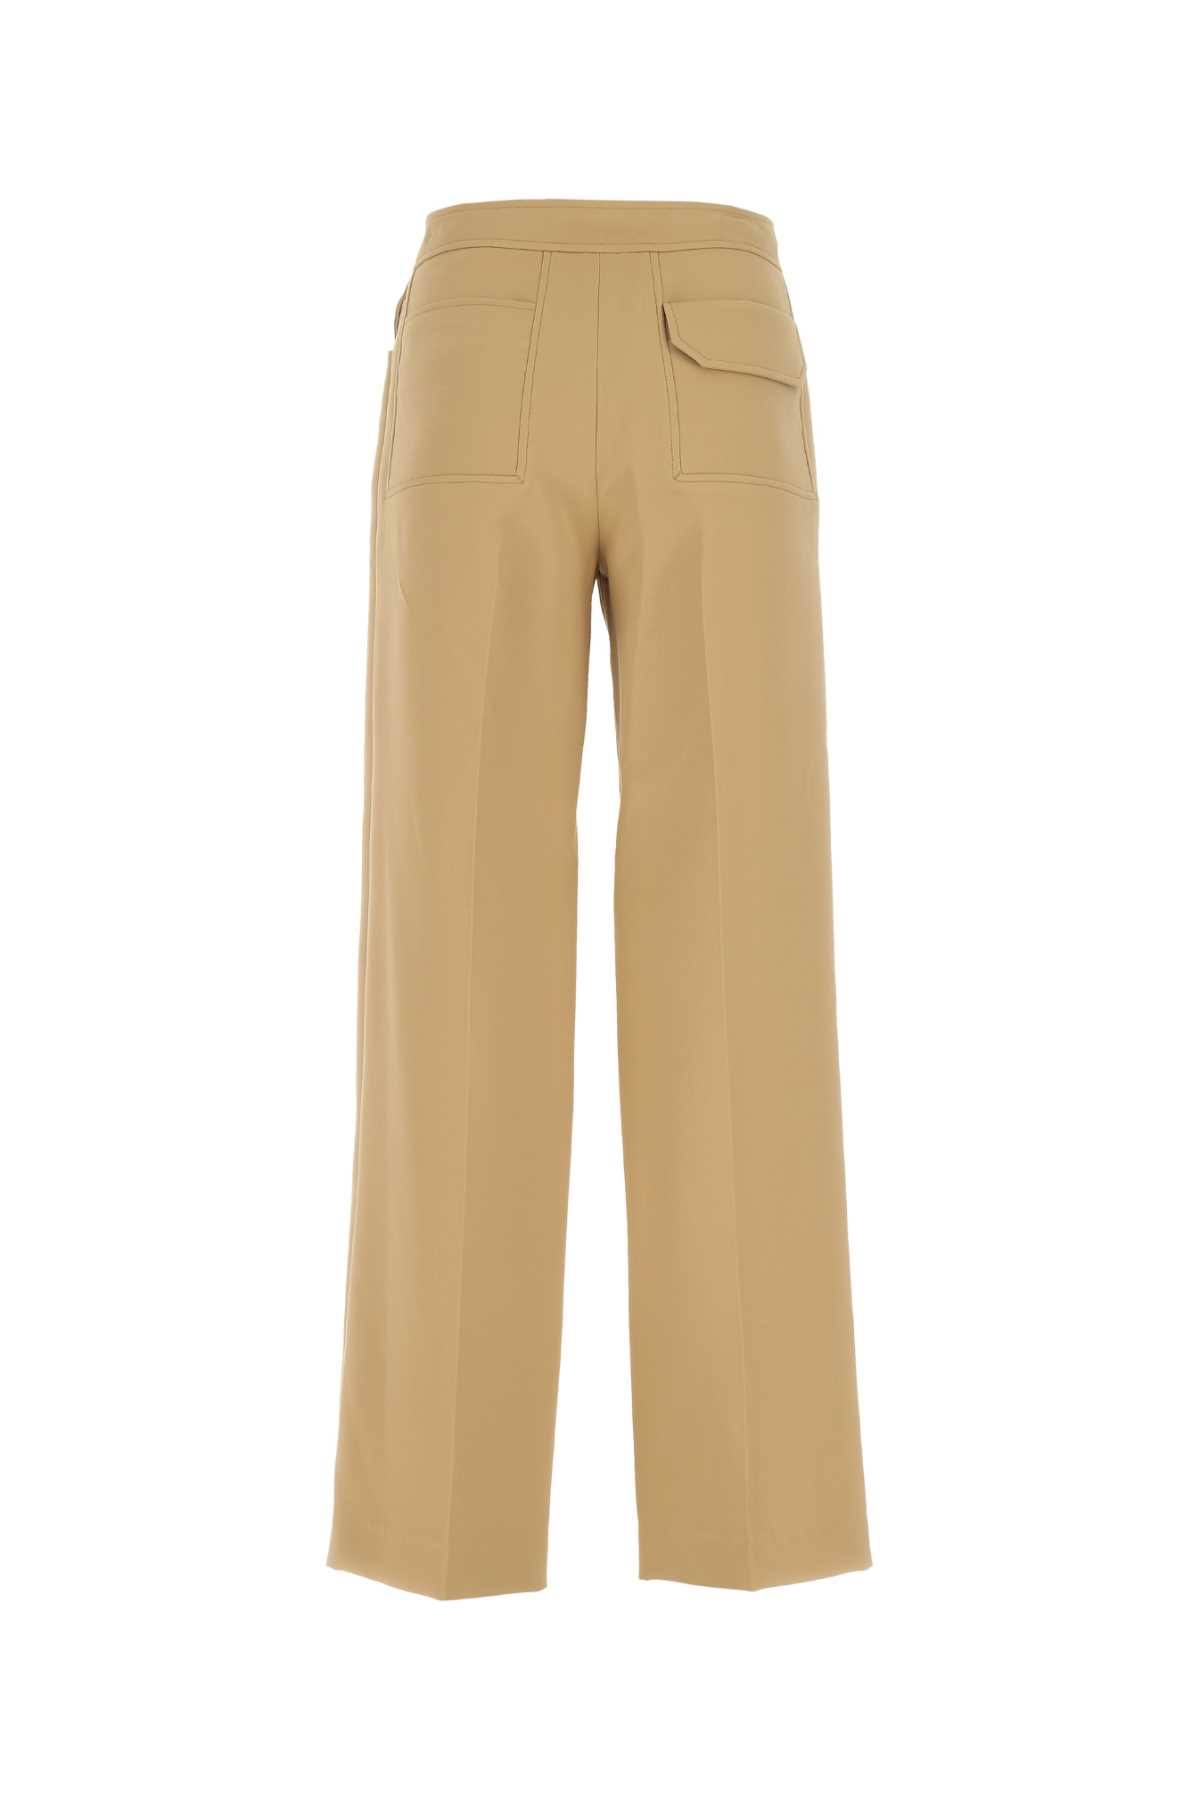 Low Classic Camel Polyester Wide-leg Pant In 0269